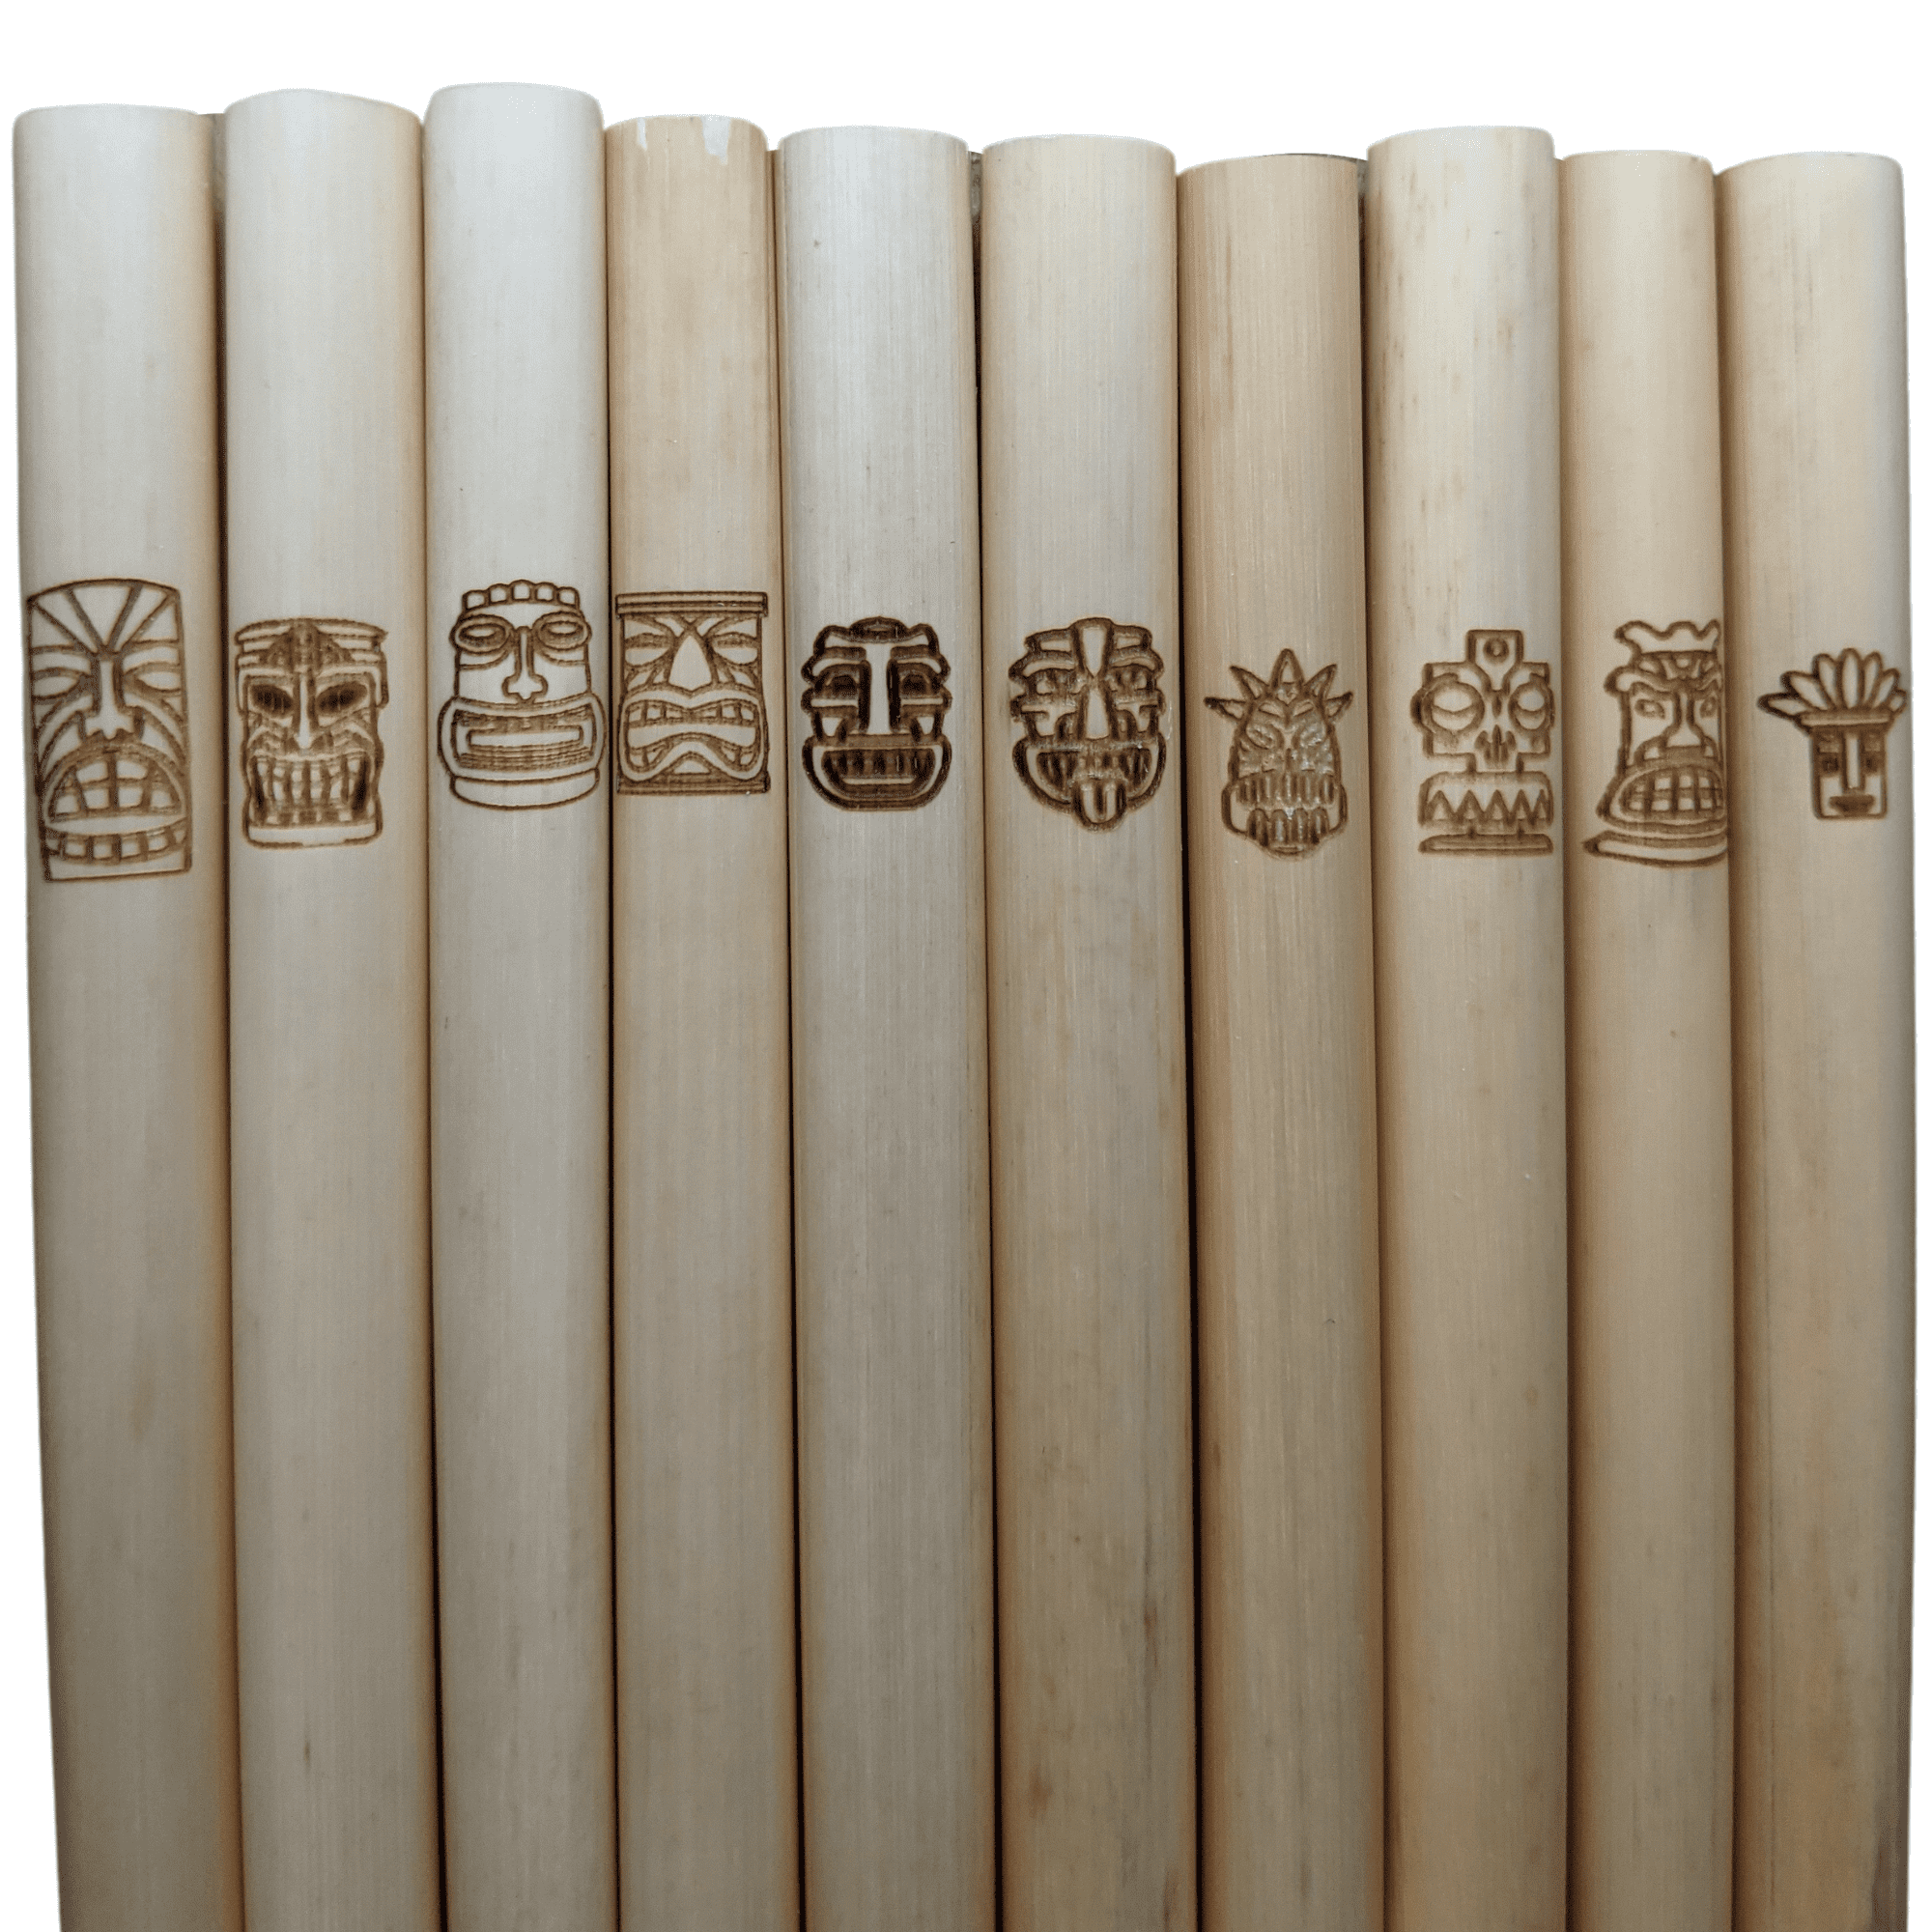 Holy City Straw Company Tiki Collector Series Branded Reed Straws 10 pack masks